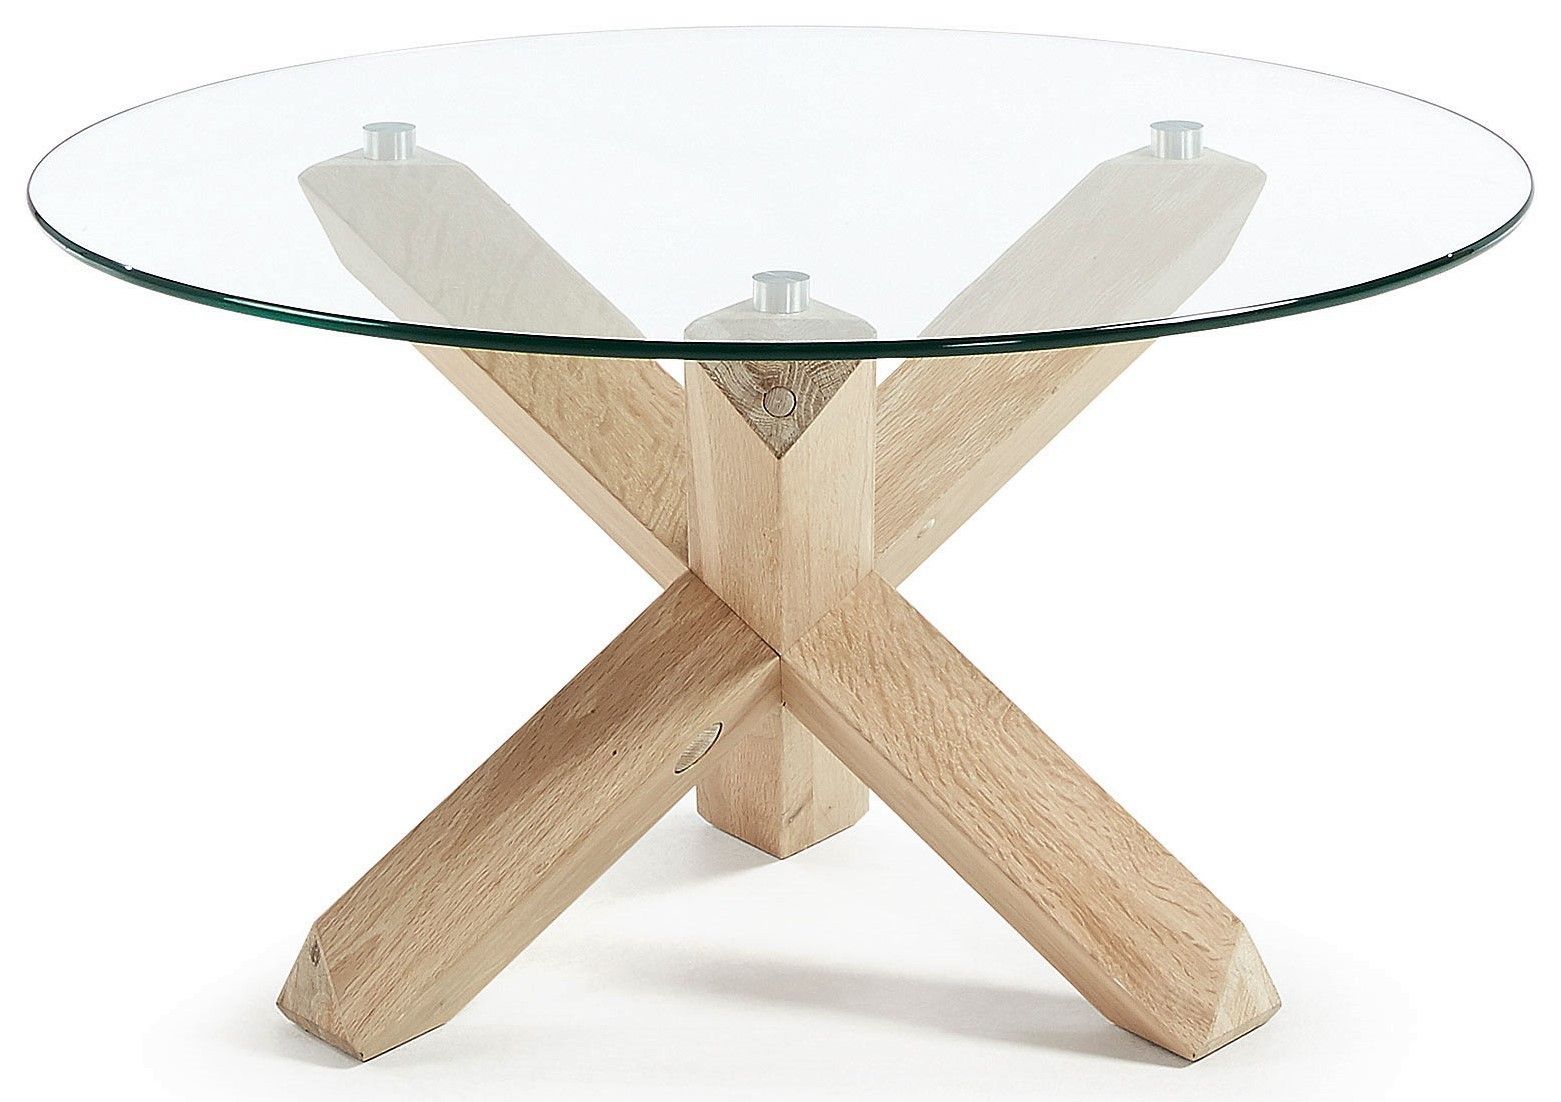 Dominik Diam 65 Coffee Table In Bleached Oak Wood And Tempered Glass Top Inside Tempered Glass Top Coffee Tables (View 6 of 15)